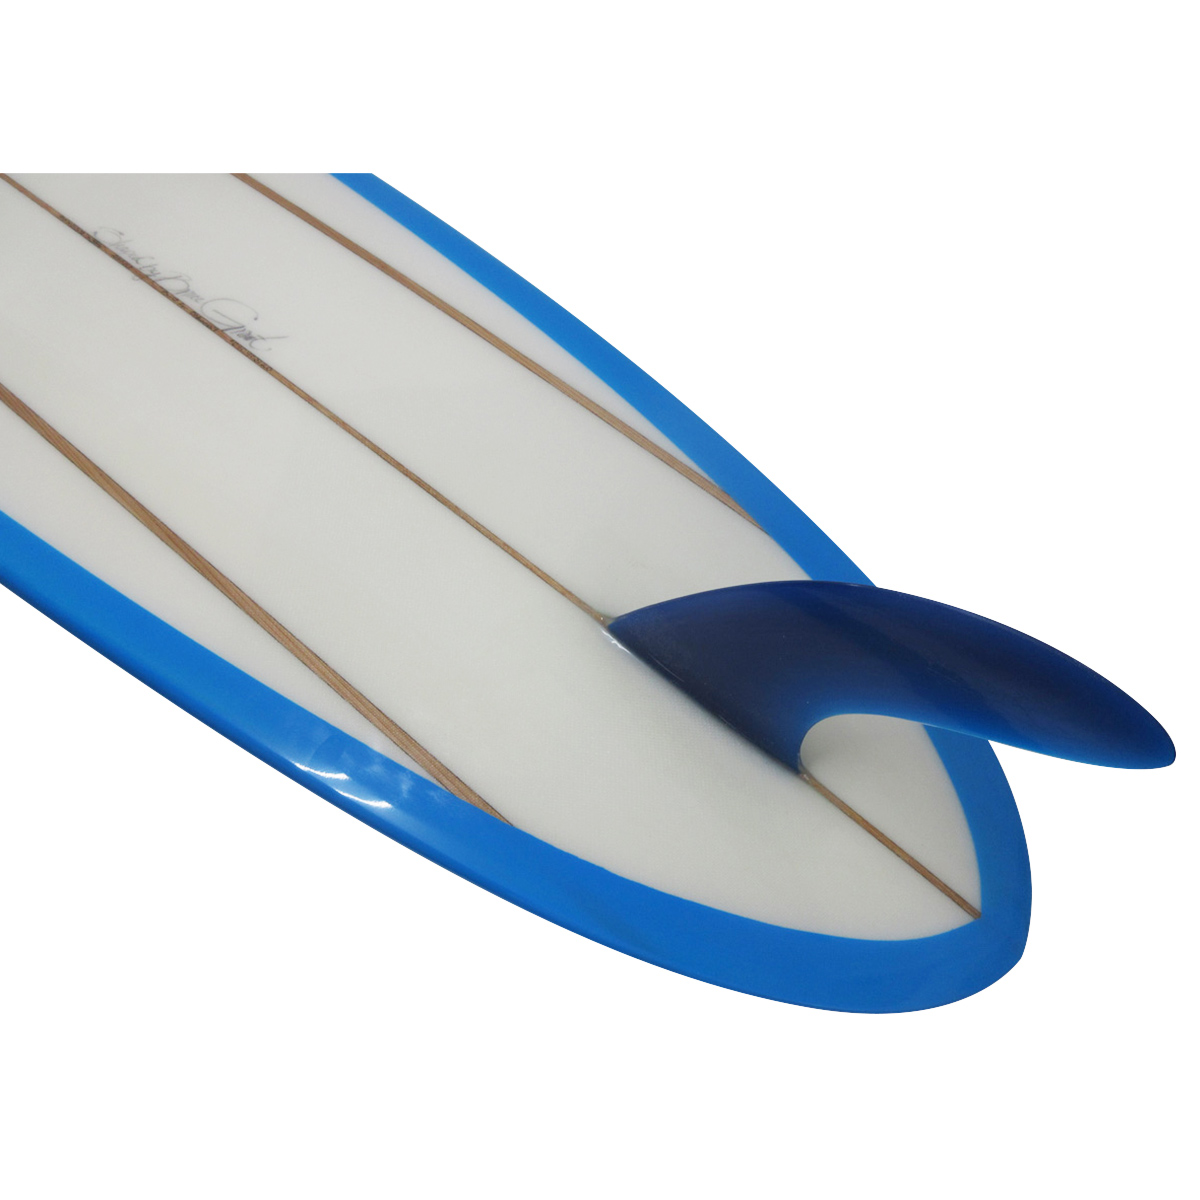 DAVE SWEET / CLASSIC PINTAIL 9`10 Shaped by BRUCE GRANT